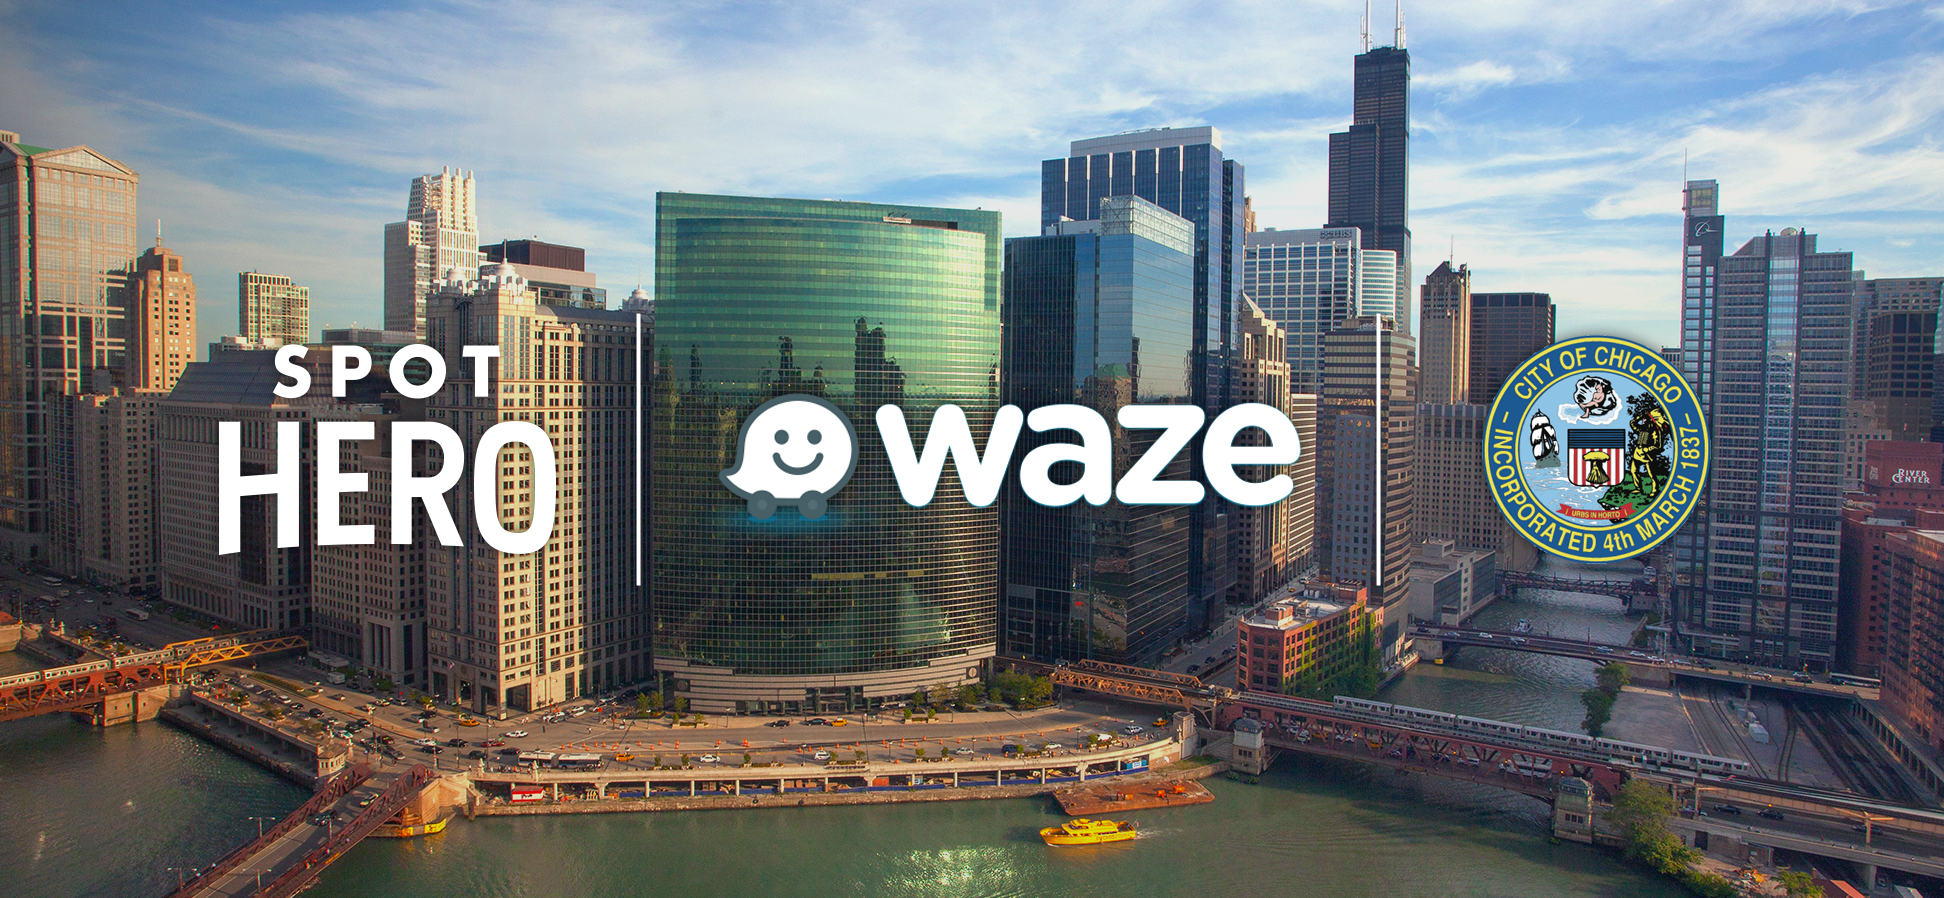 SpotHero, Waze and City of Chicago Join Forces to Outsmart Traffic on Chicago’s Multi-Level Roads